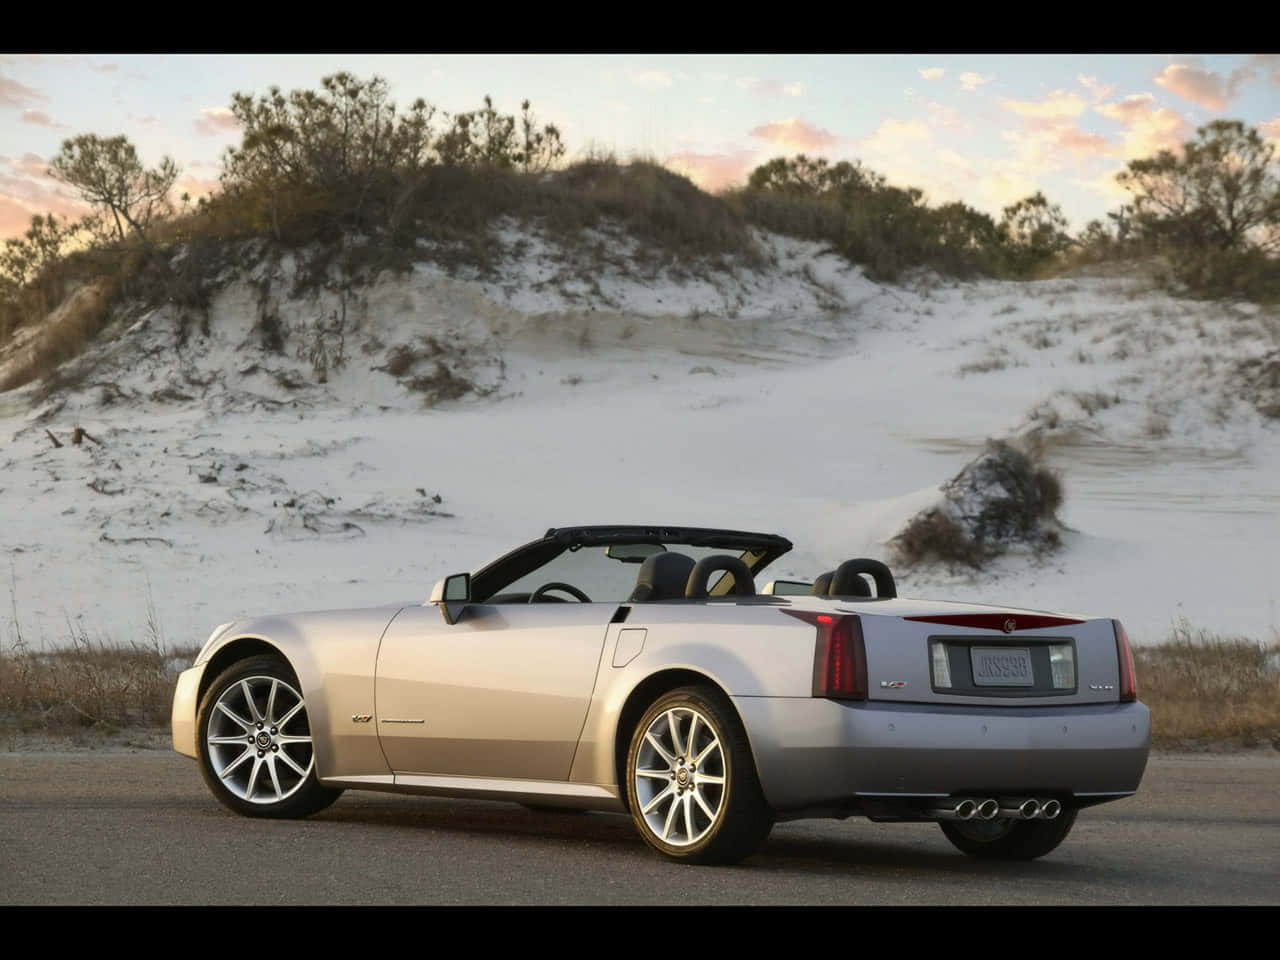 Captivating Cadillac XLR: A Perfect Blend of Luxury and Performance Wallpaper